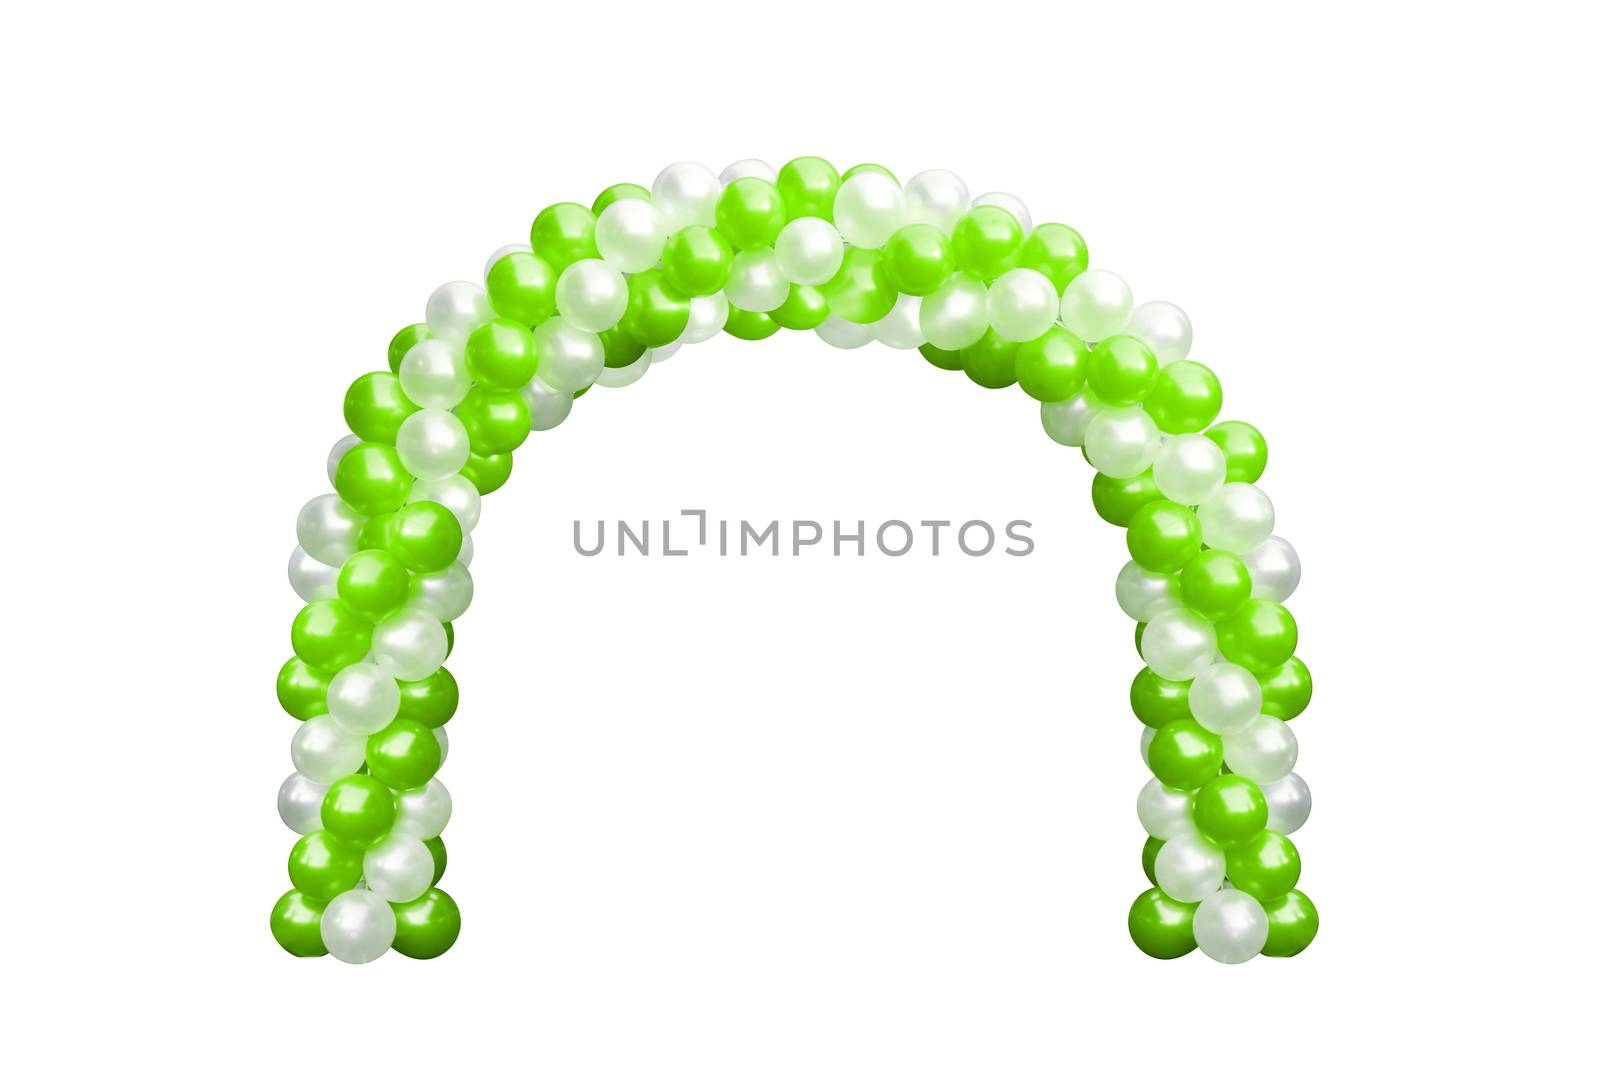 Balloon Archway door Green and white, Arches wedding, Balloon Festival design decoration elements with arch floral design isolated on white Background by cgdeaw